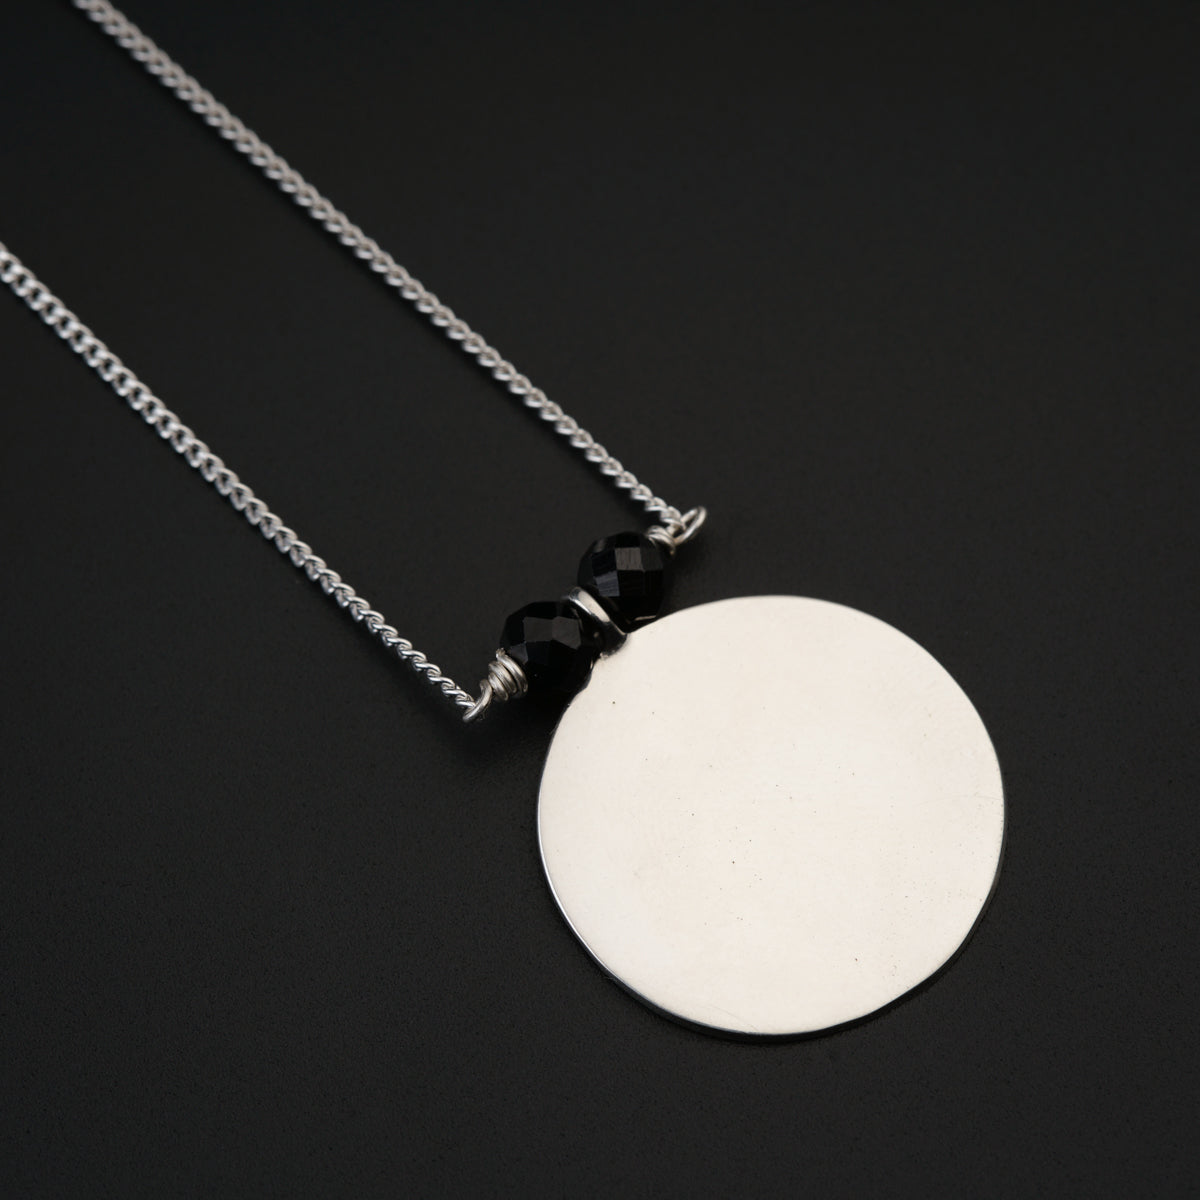 a white disc on a chain on a black surface